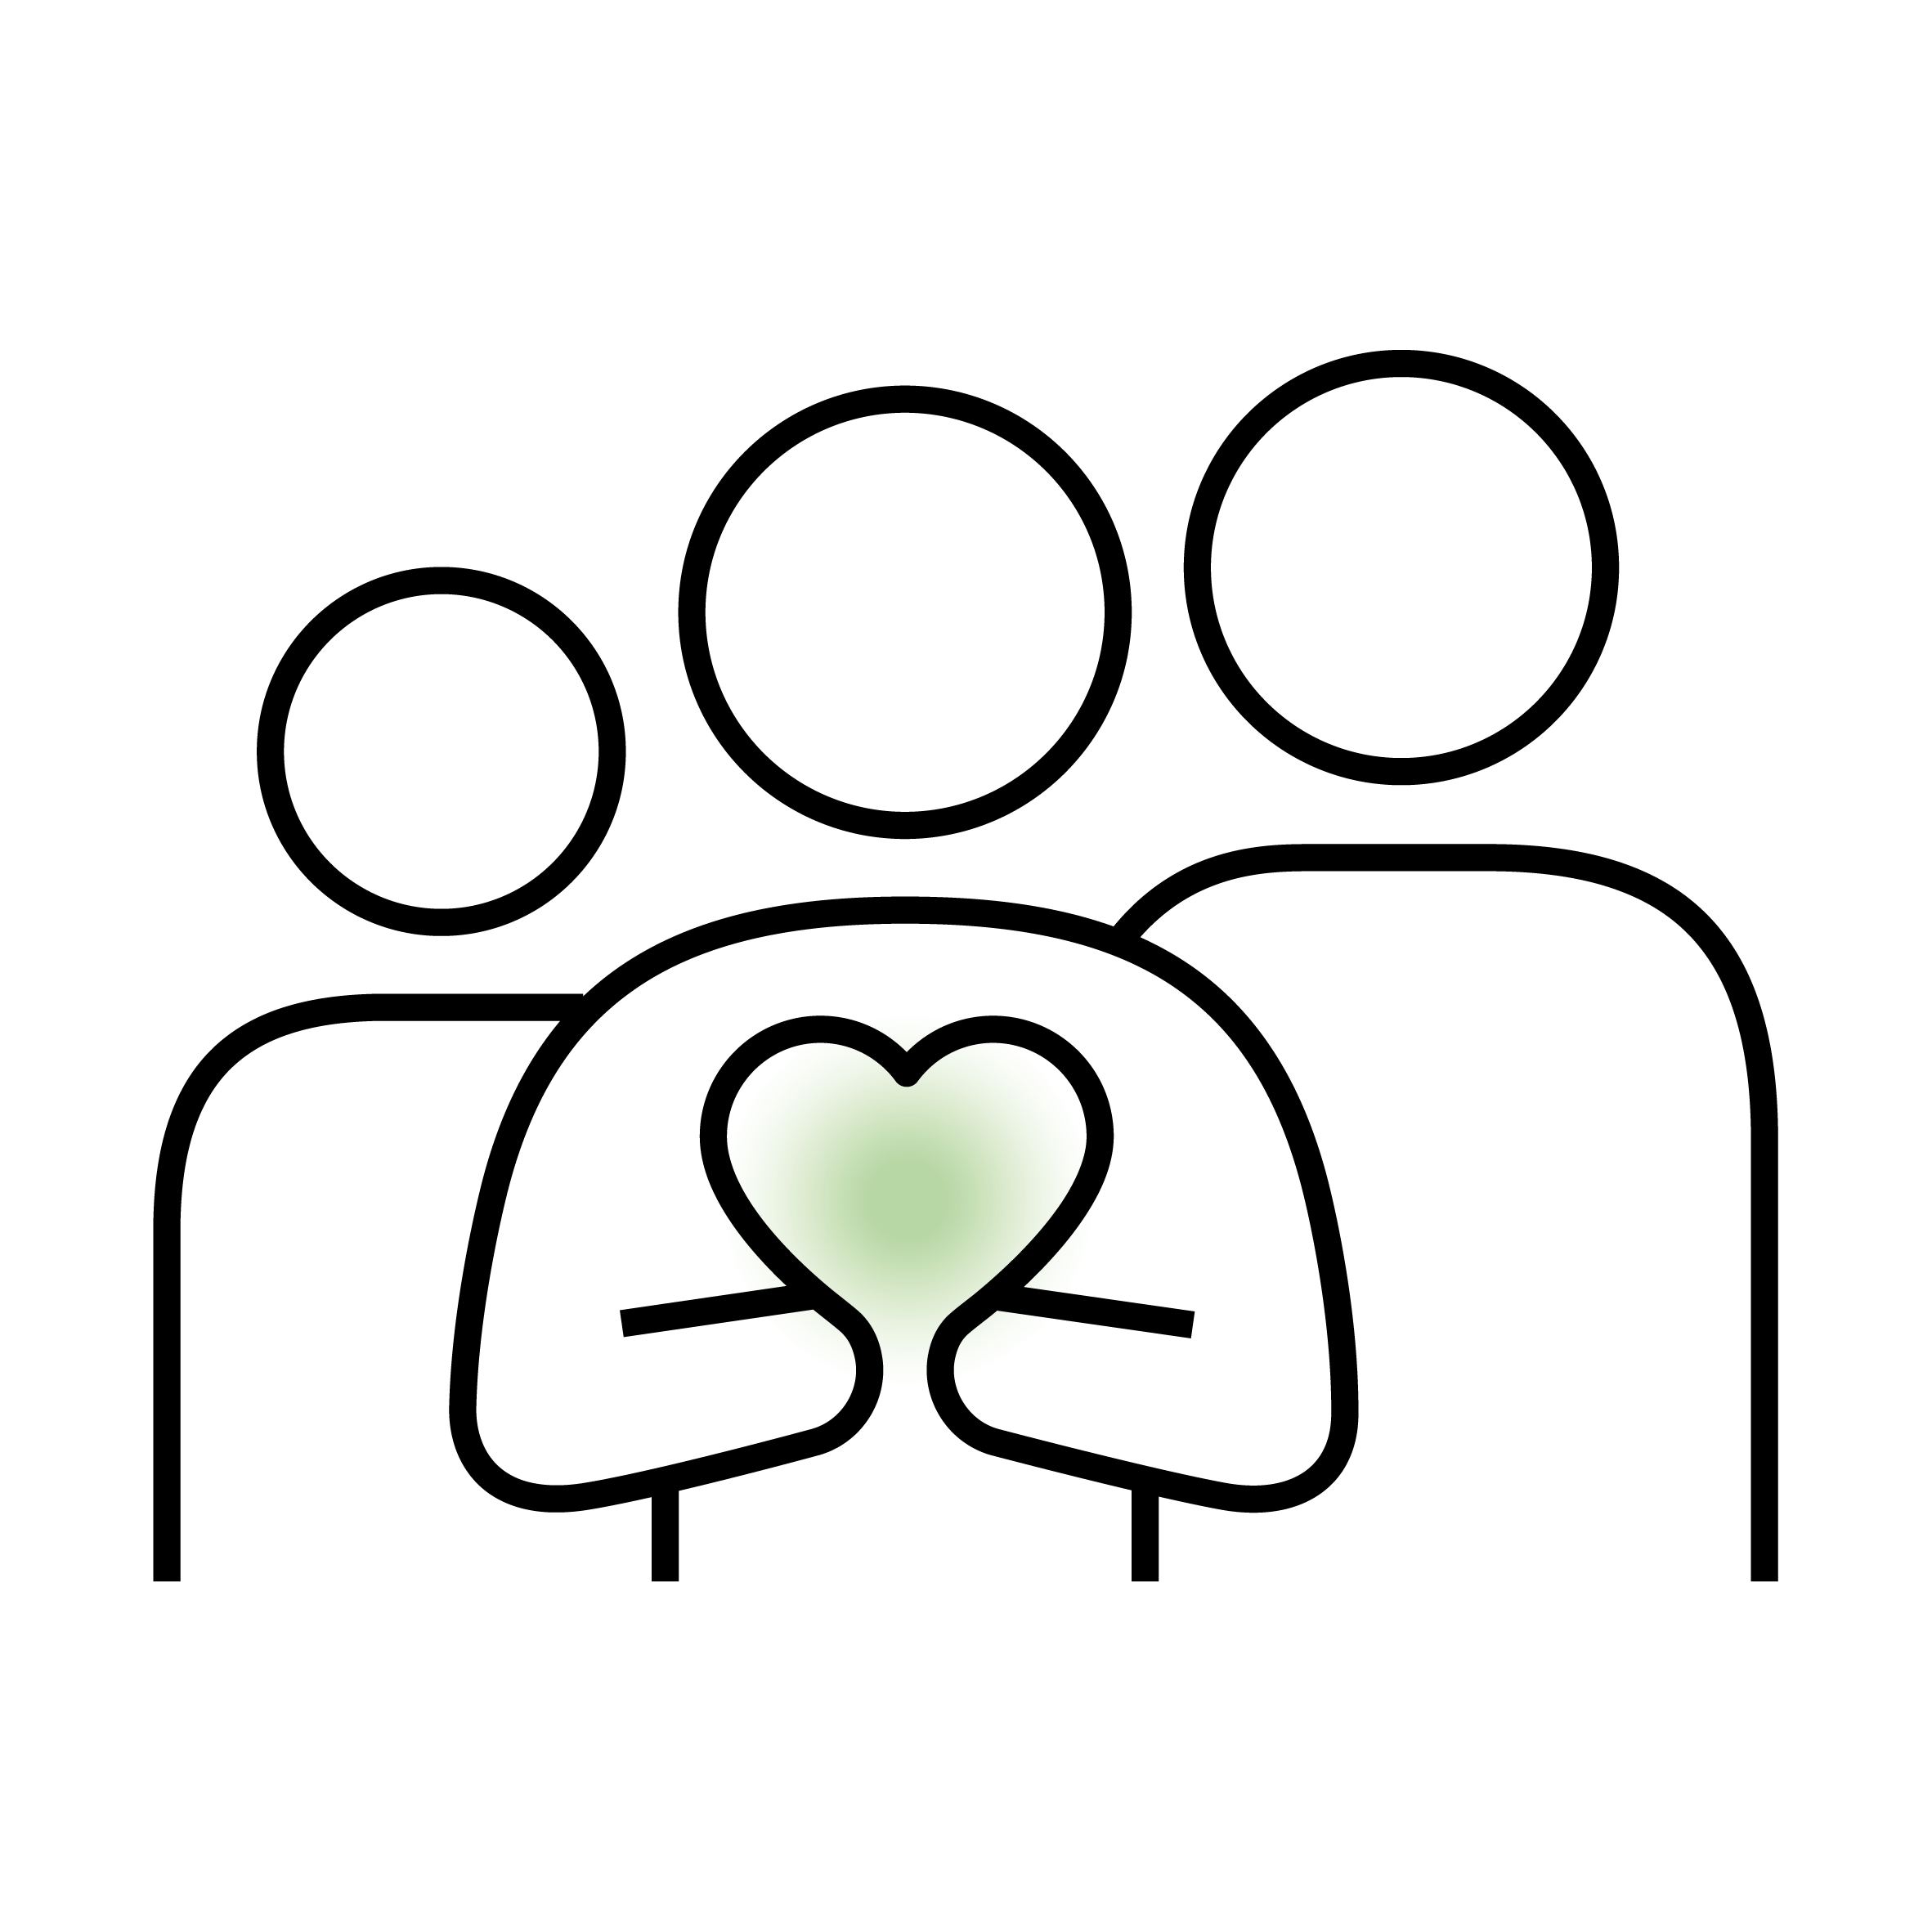 Vector graphic of three stylised people with a heart symbol.